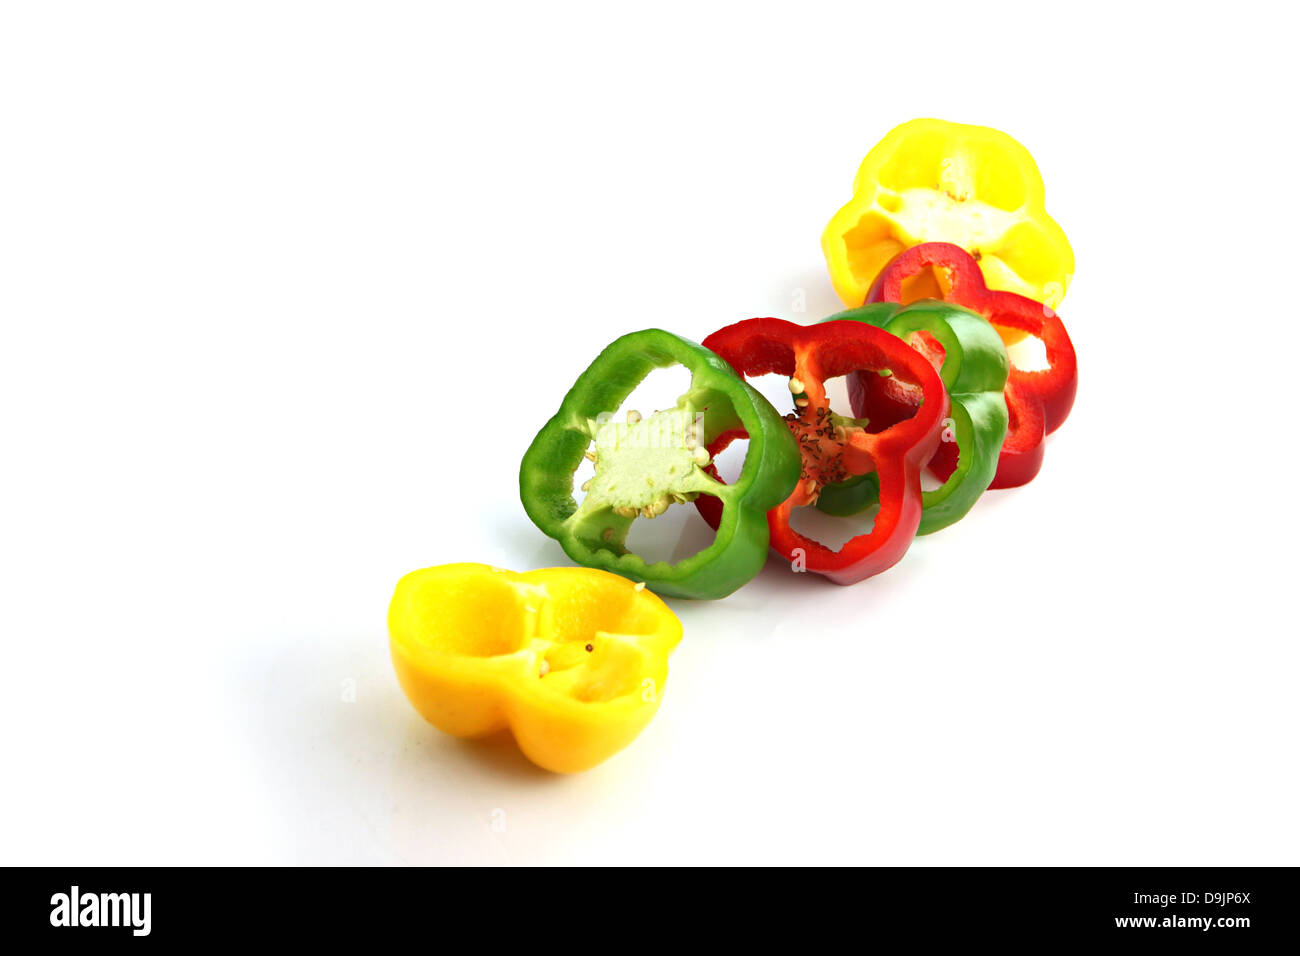 Slice the Three color of bell pepper on the white background. Stock Photo